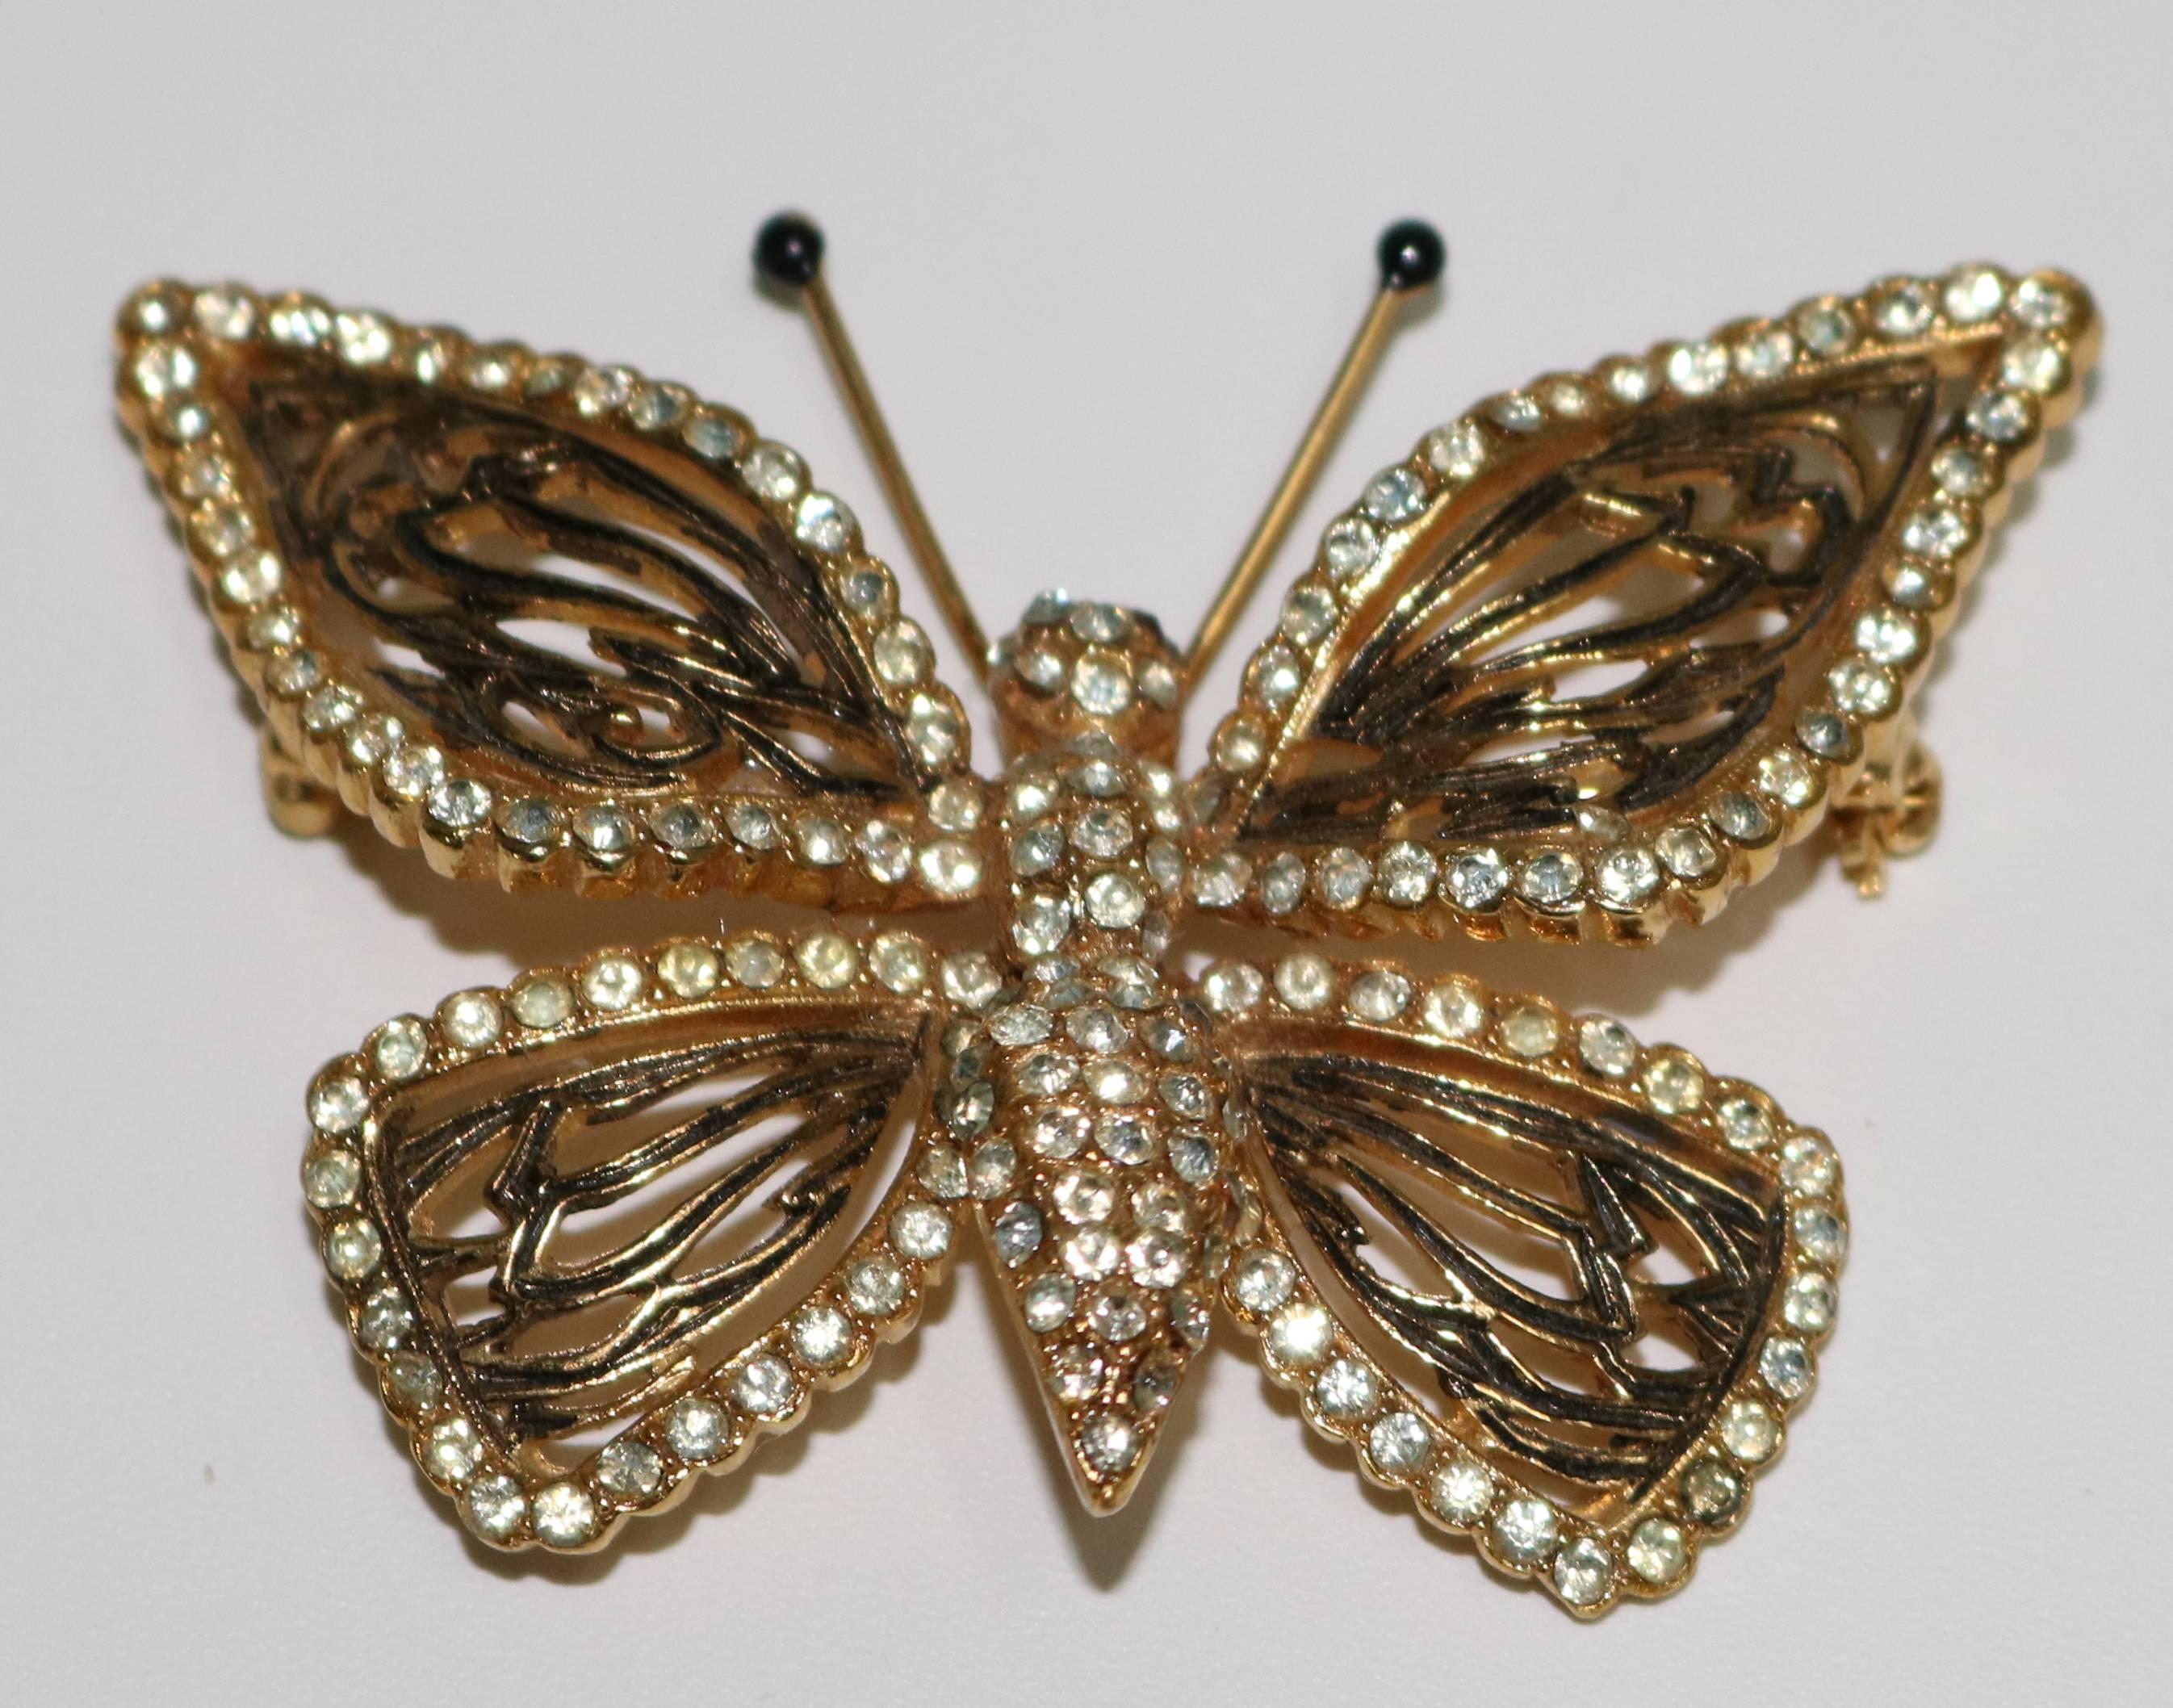 A lovely butterfly with diamante bordered wings and body in gold plate black enameled articulated wings and black stone topped antennae and red stone eyes. Marked en verso Vogue Jlry.

From the Edith Hale Harkness estate.